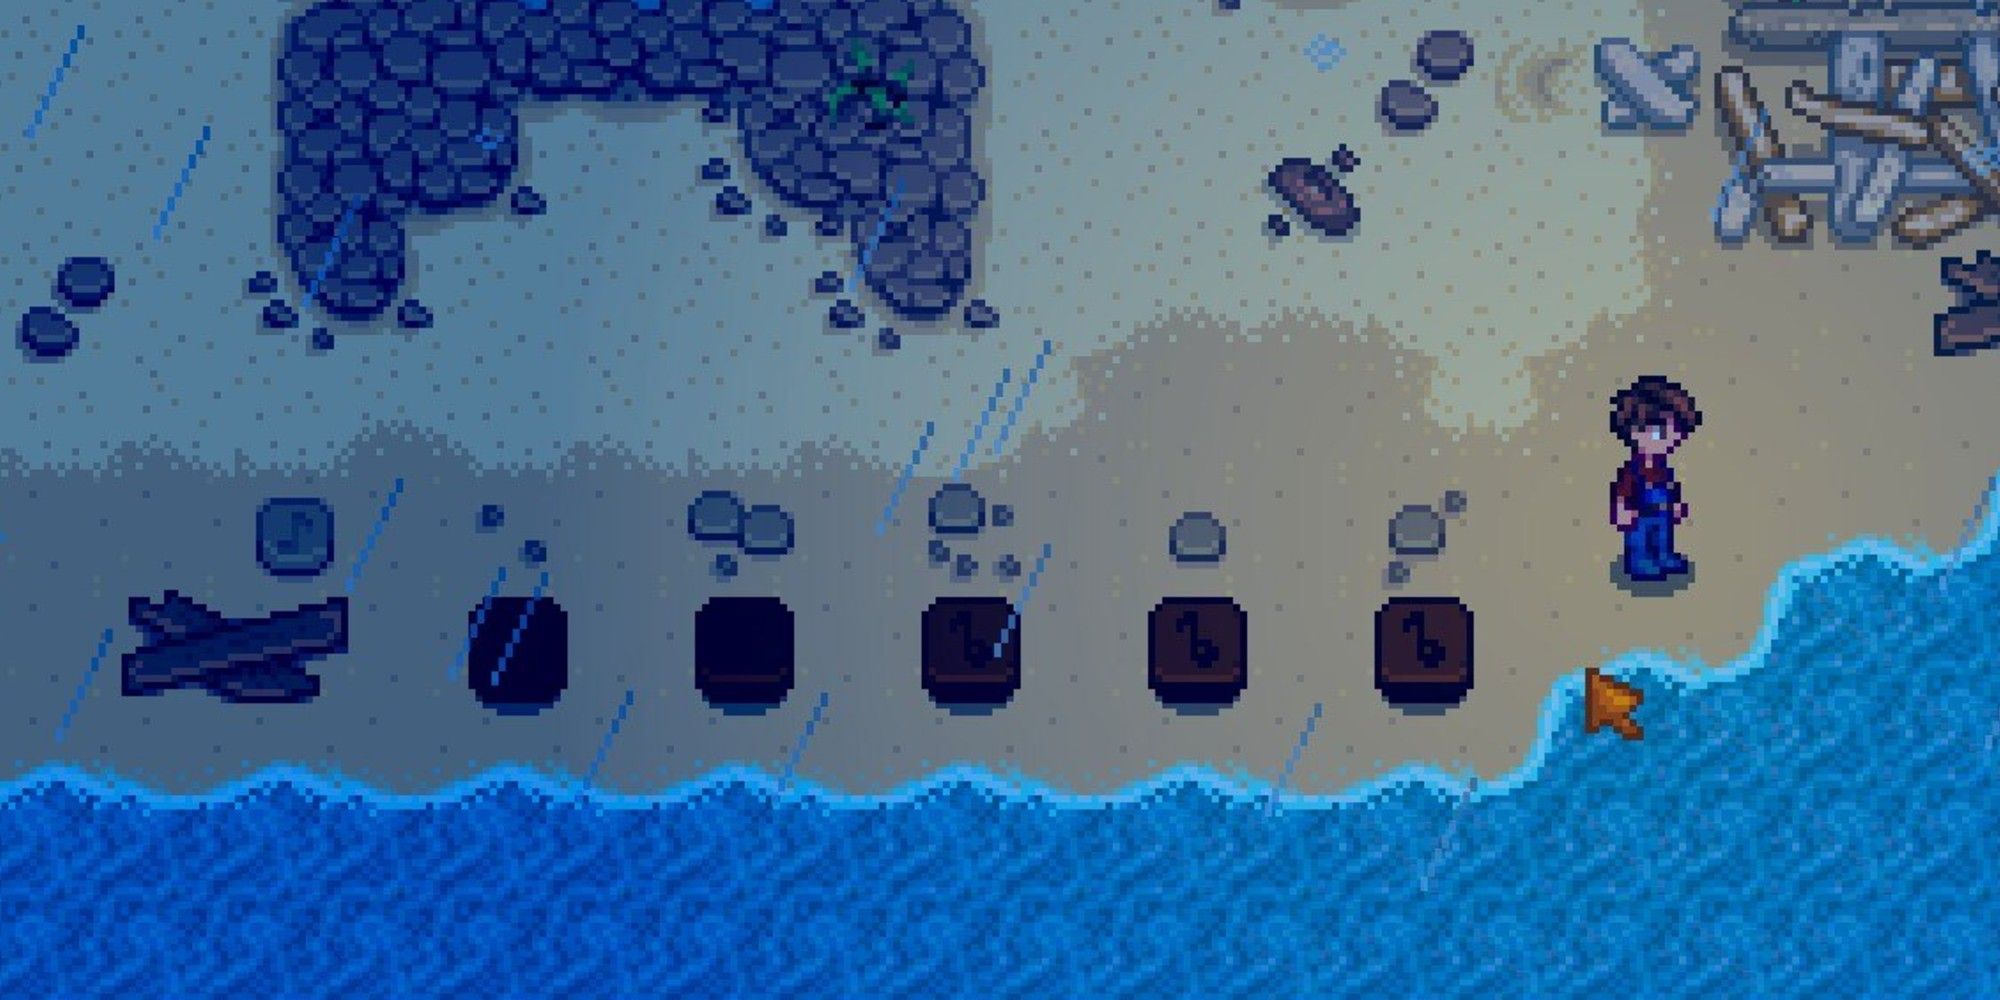 player standing on ginger island beach with flute blocks for mermaid puzzle